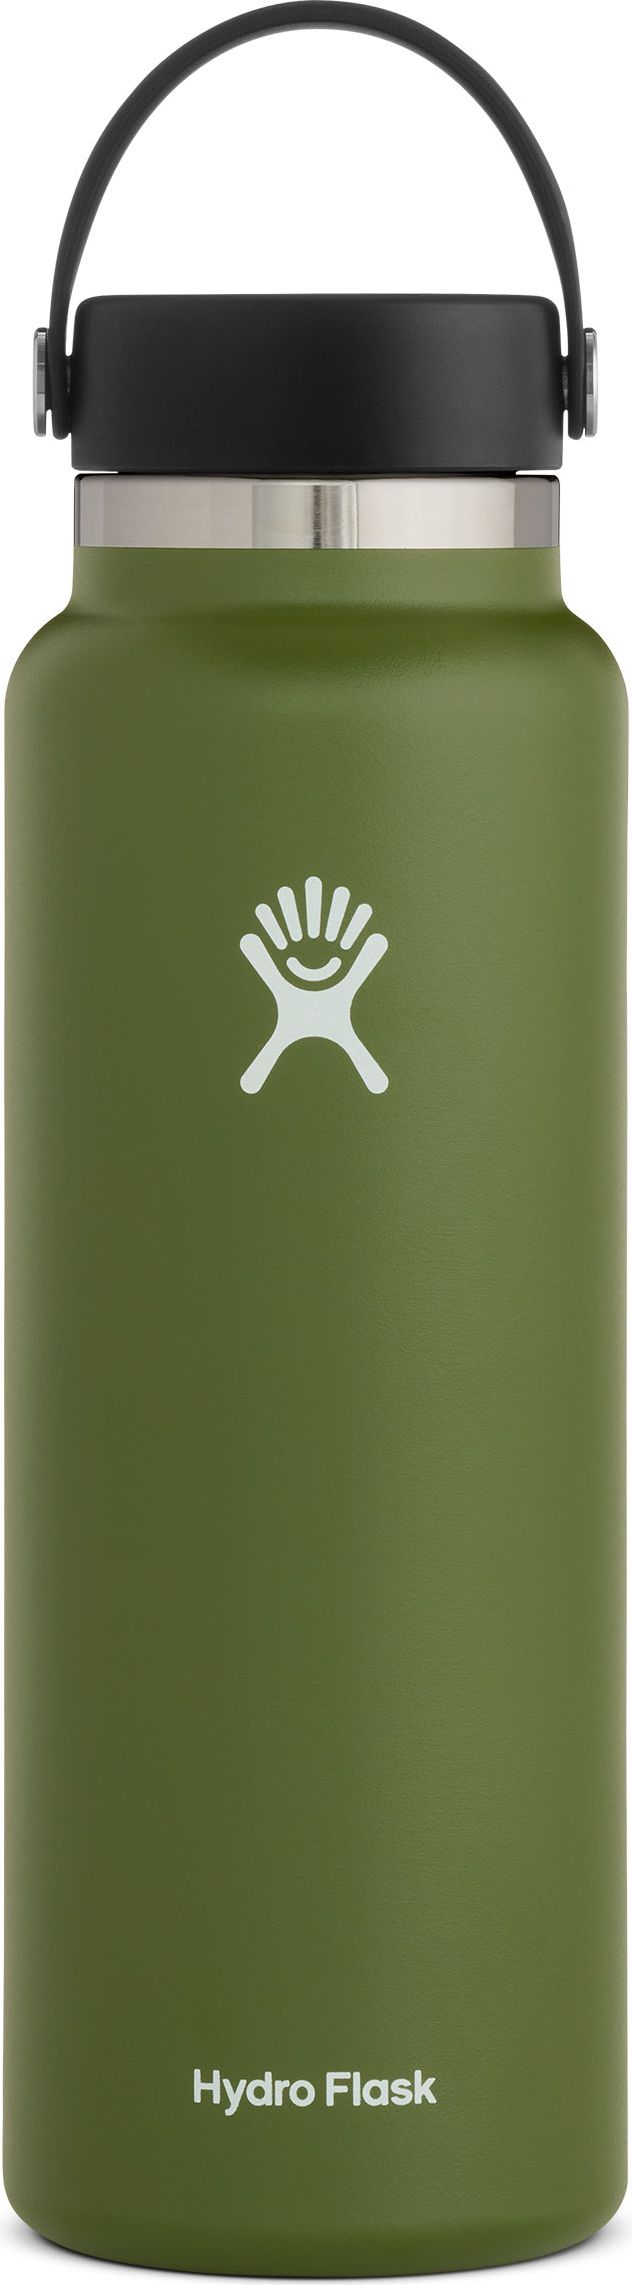 Hydro Flask Accessories 40oz Wide Mouth 2.0 Olive